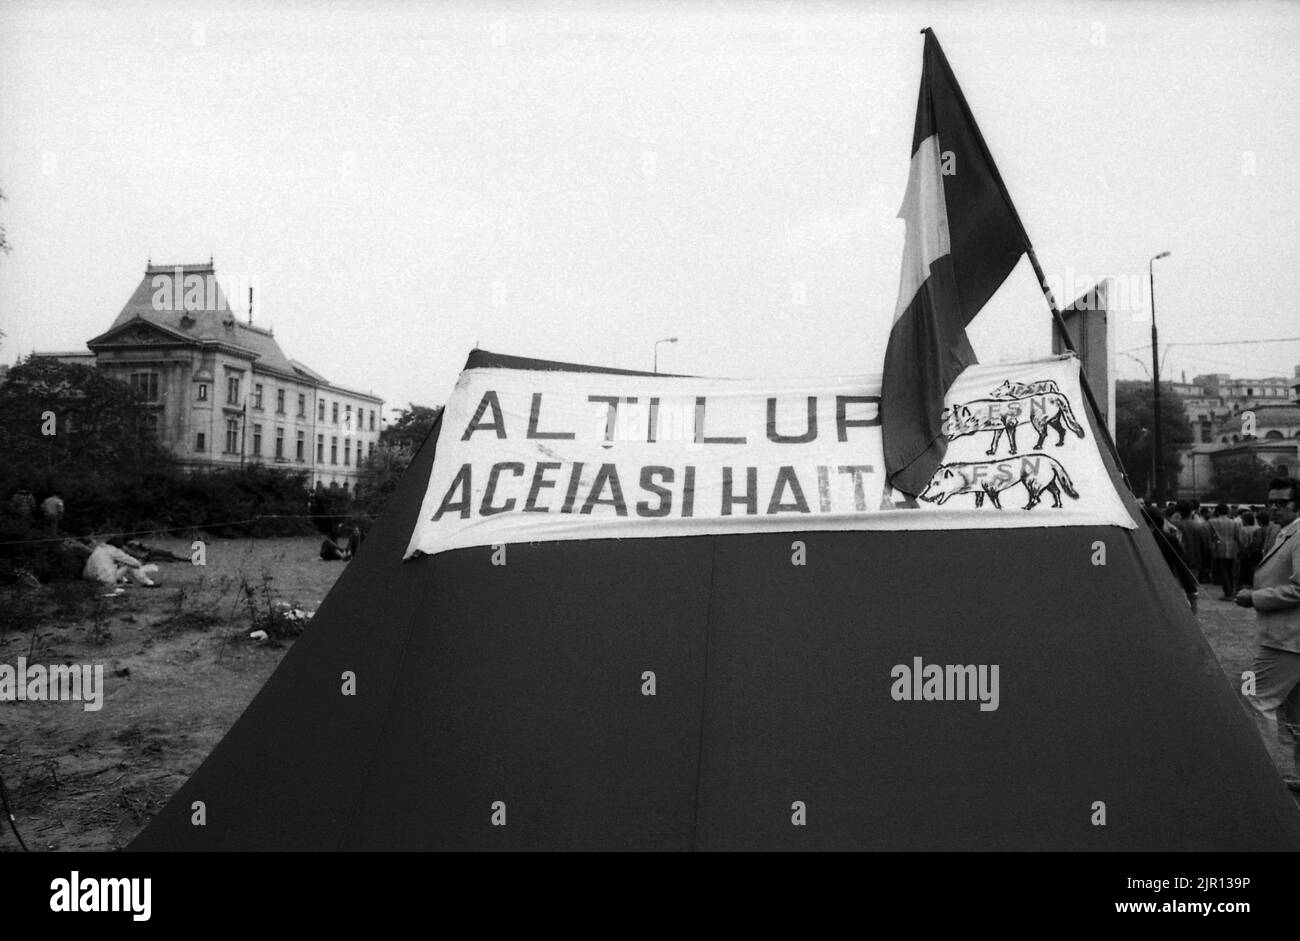 Bucharest, Romania, May 1990. 'Golaniada', a major anti-communism protest  in the University Square following the Romanian Revolution of 1989. People would gather daily to protest the ex-communists that took the power after the Revolution. Some people were camping in the square, staying there for weeks on end. The banner on this tent says: 'Different wolves, same pack', referring to F.S.N., the new party in power. Stock Photo